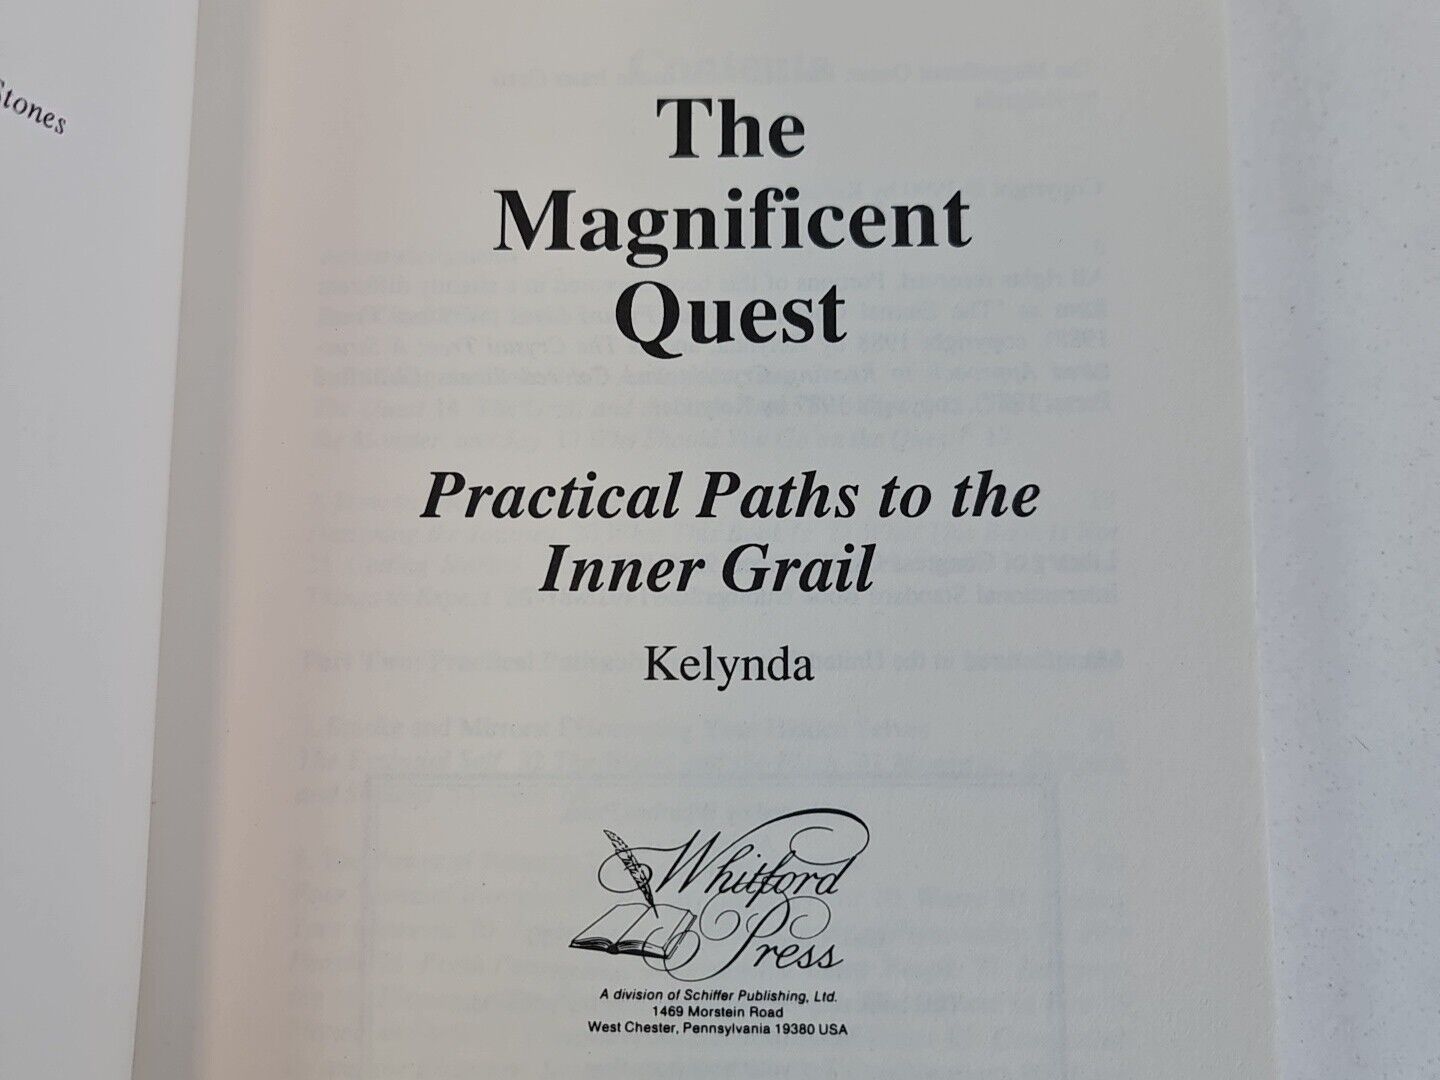 The Magnificent Quest by Kelynda (1997)